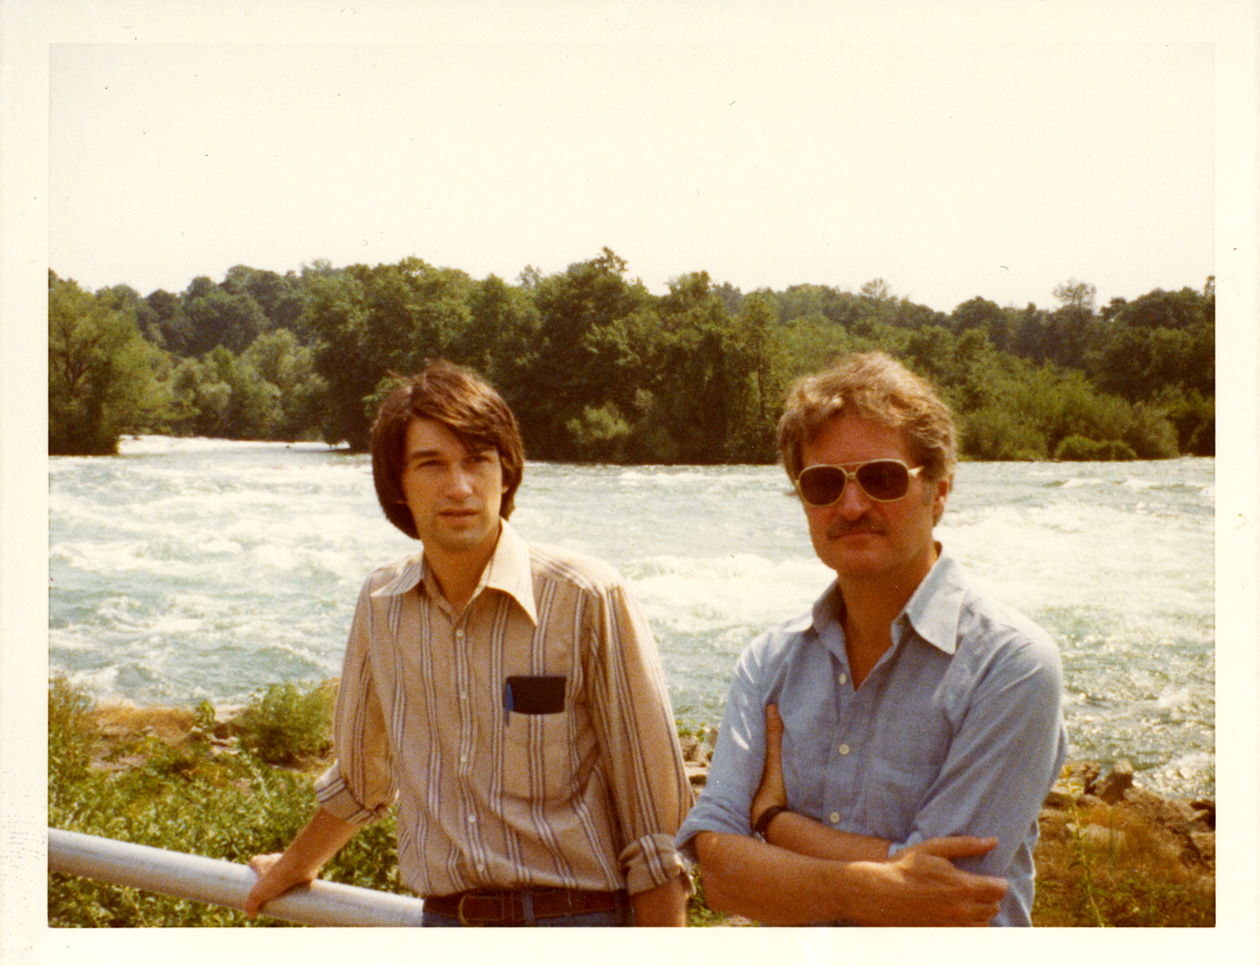   Douglas and John Ashbery during a trip to Niagara Falls, 1975. Snapshot taken during a trip to Niagara Falls with Douglas, Tom Smith and John Ashbery.